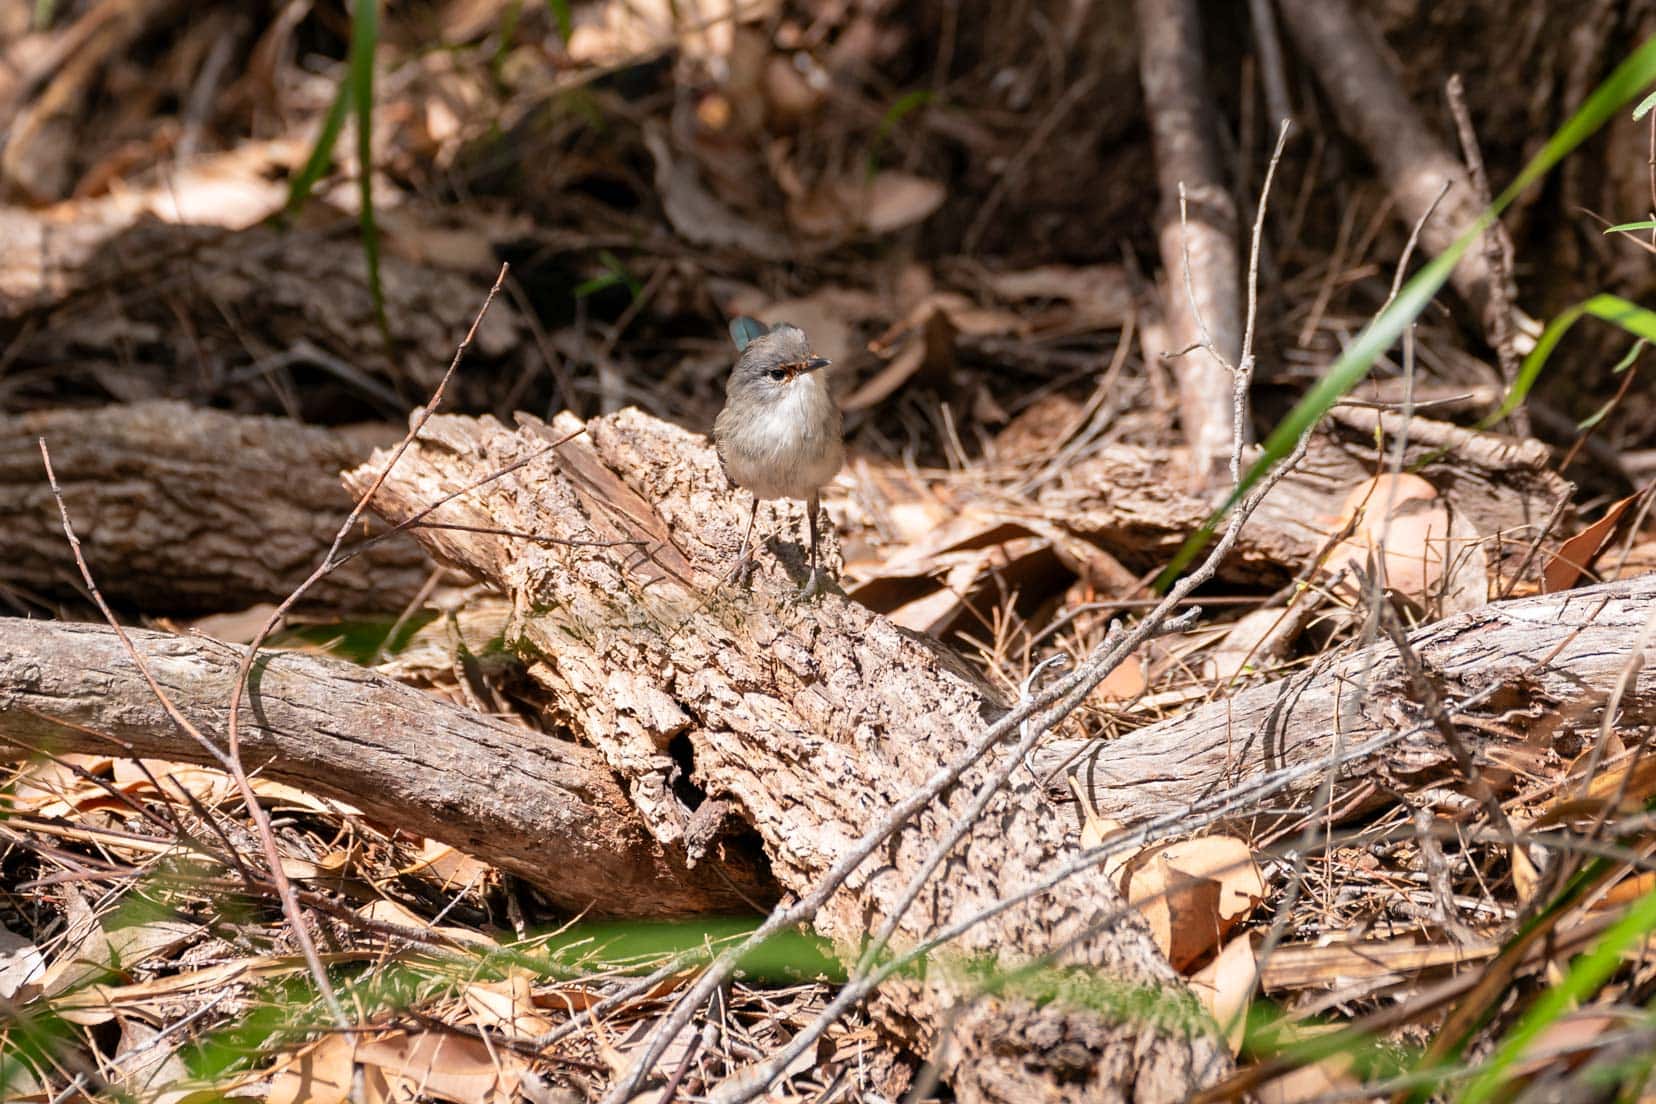 Female fairy wren - light brown with bluish hue long tail